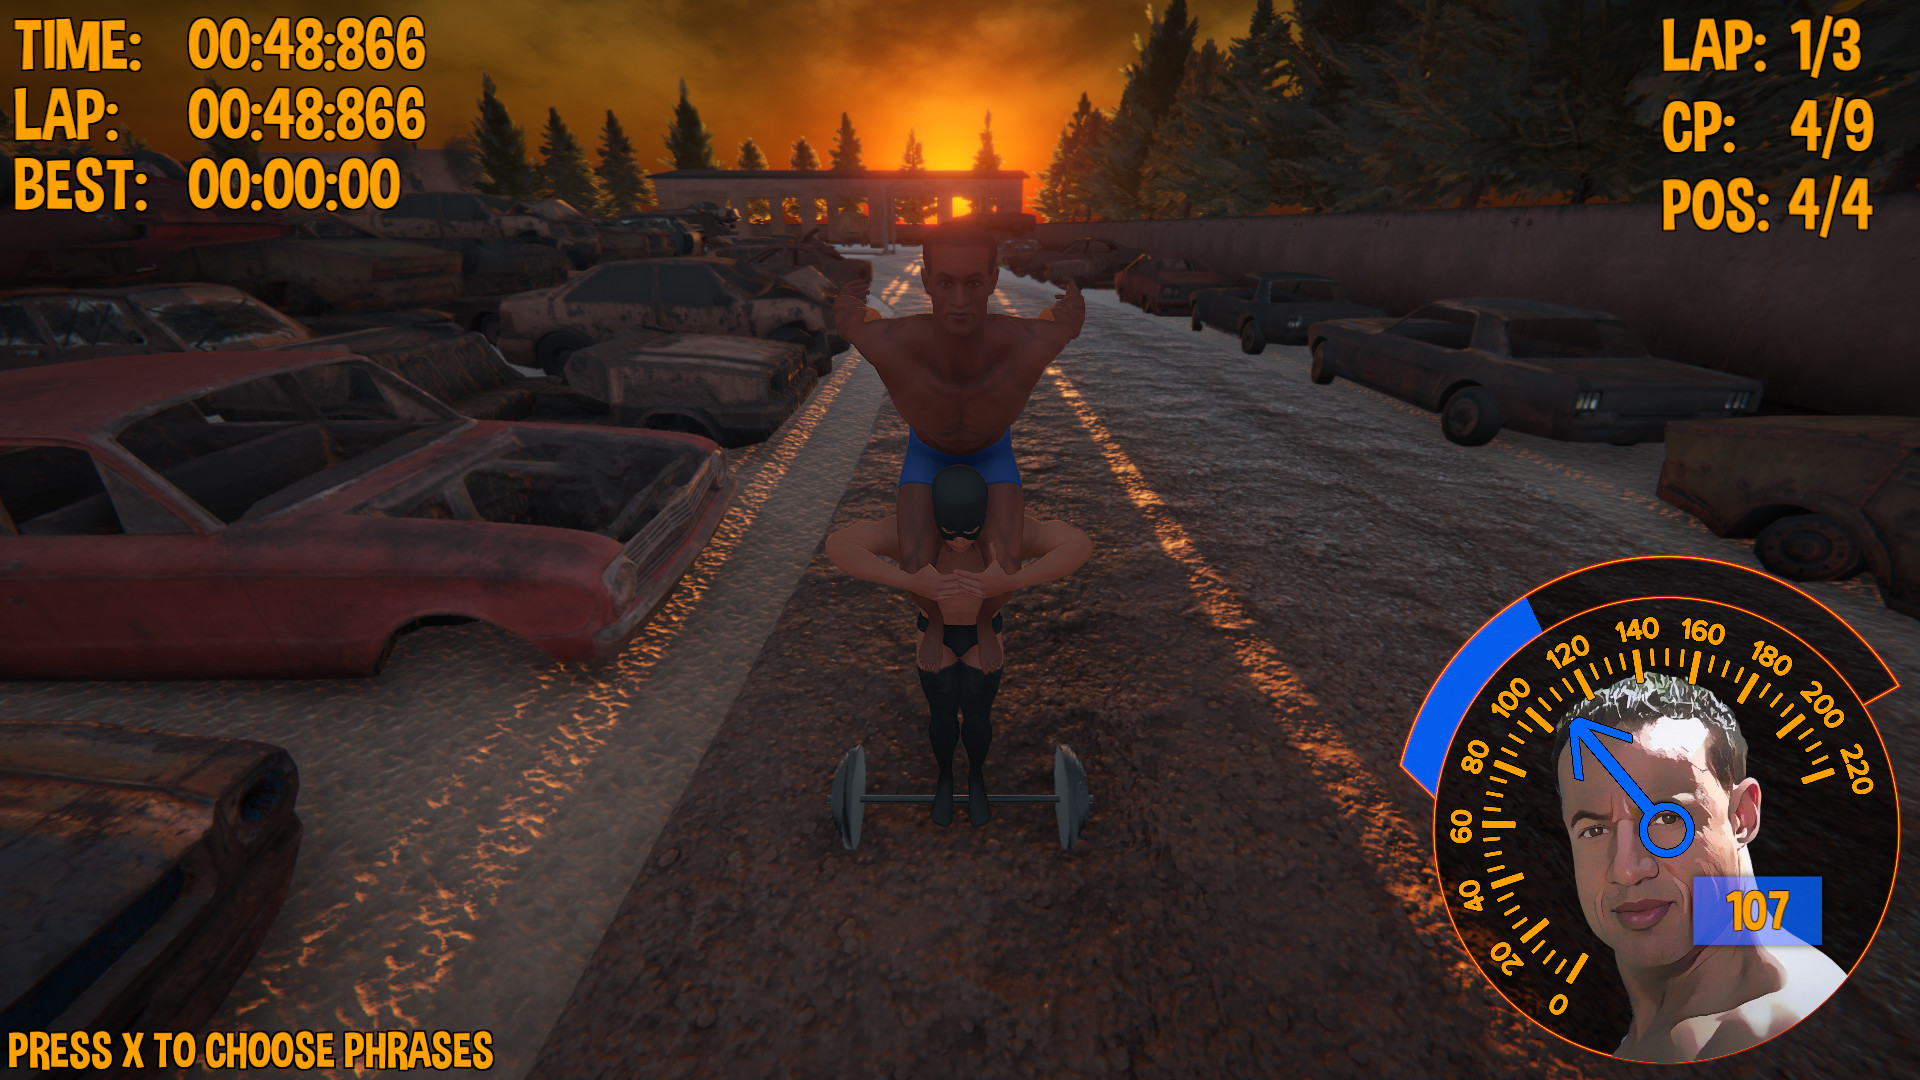 Ultimate Muscle Roller Championship Steam CD Key 3.38 $